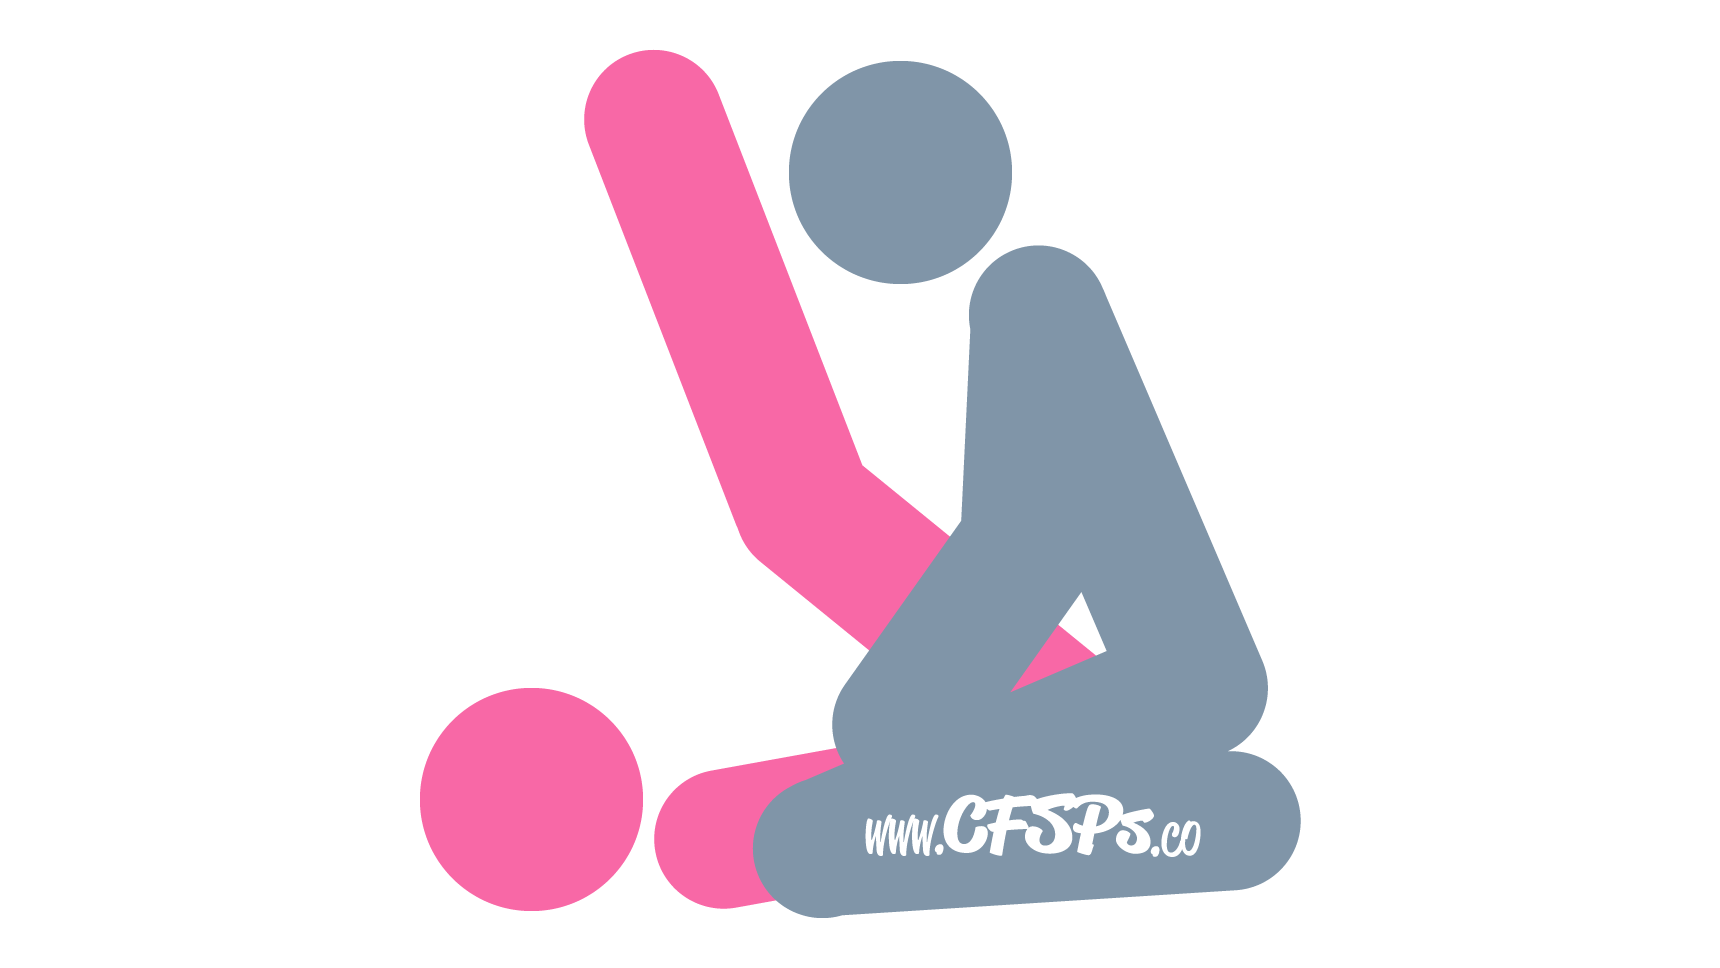 This stick figure image depicts a man and woman having sex in the Rock'n Roller sex position. The man is kneeling with his legs open a little and sitting back on his feet. The woman's body is positioned with her pelvis in his lap and her feet straight up in the air.